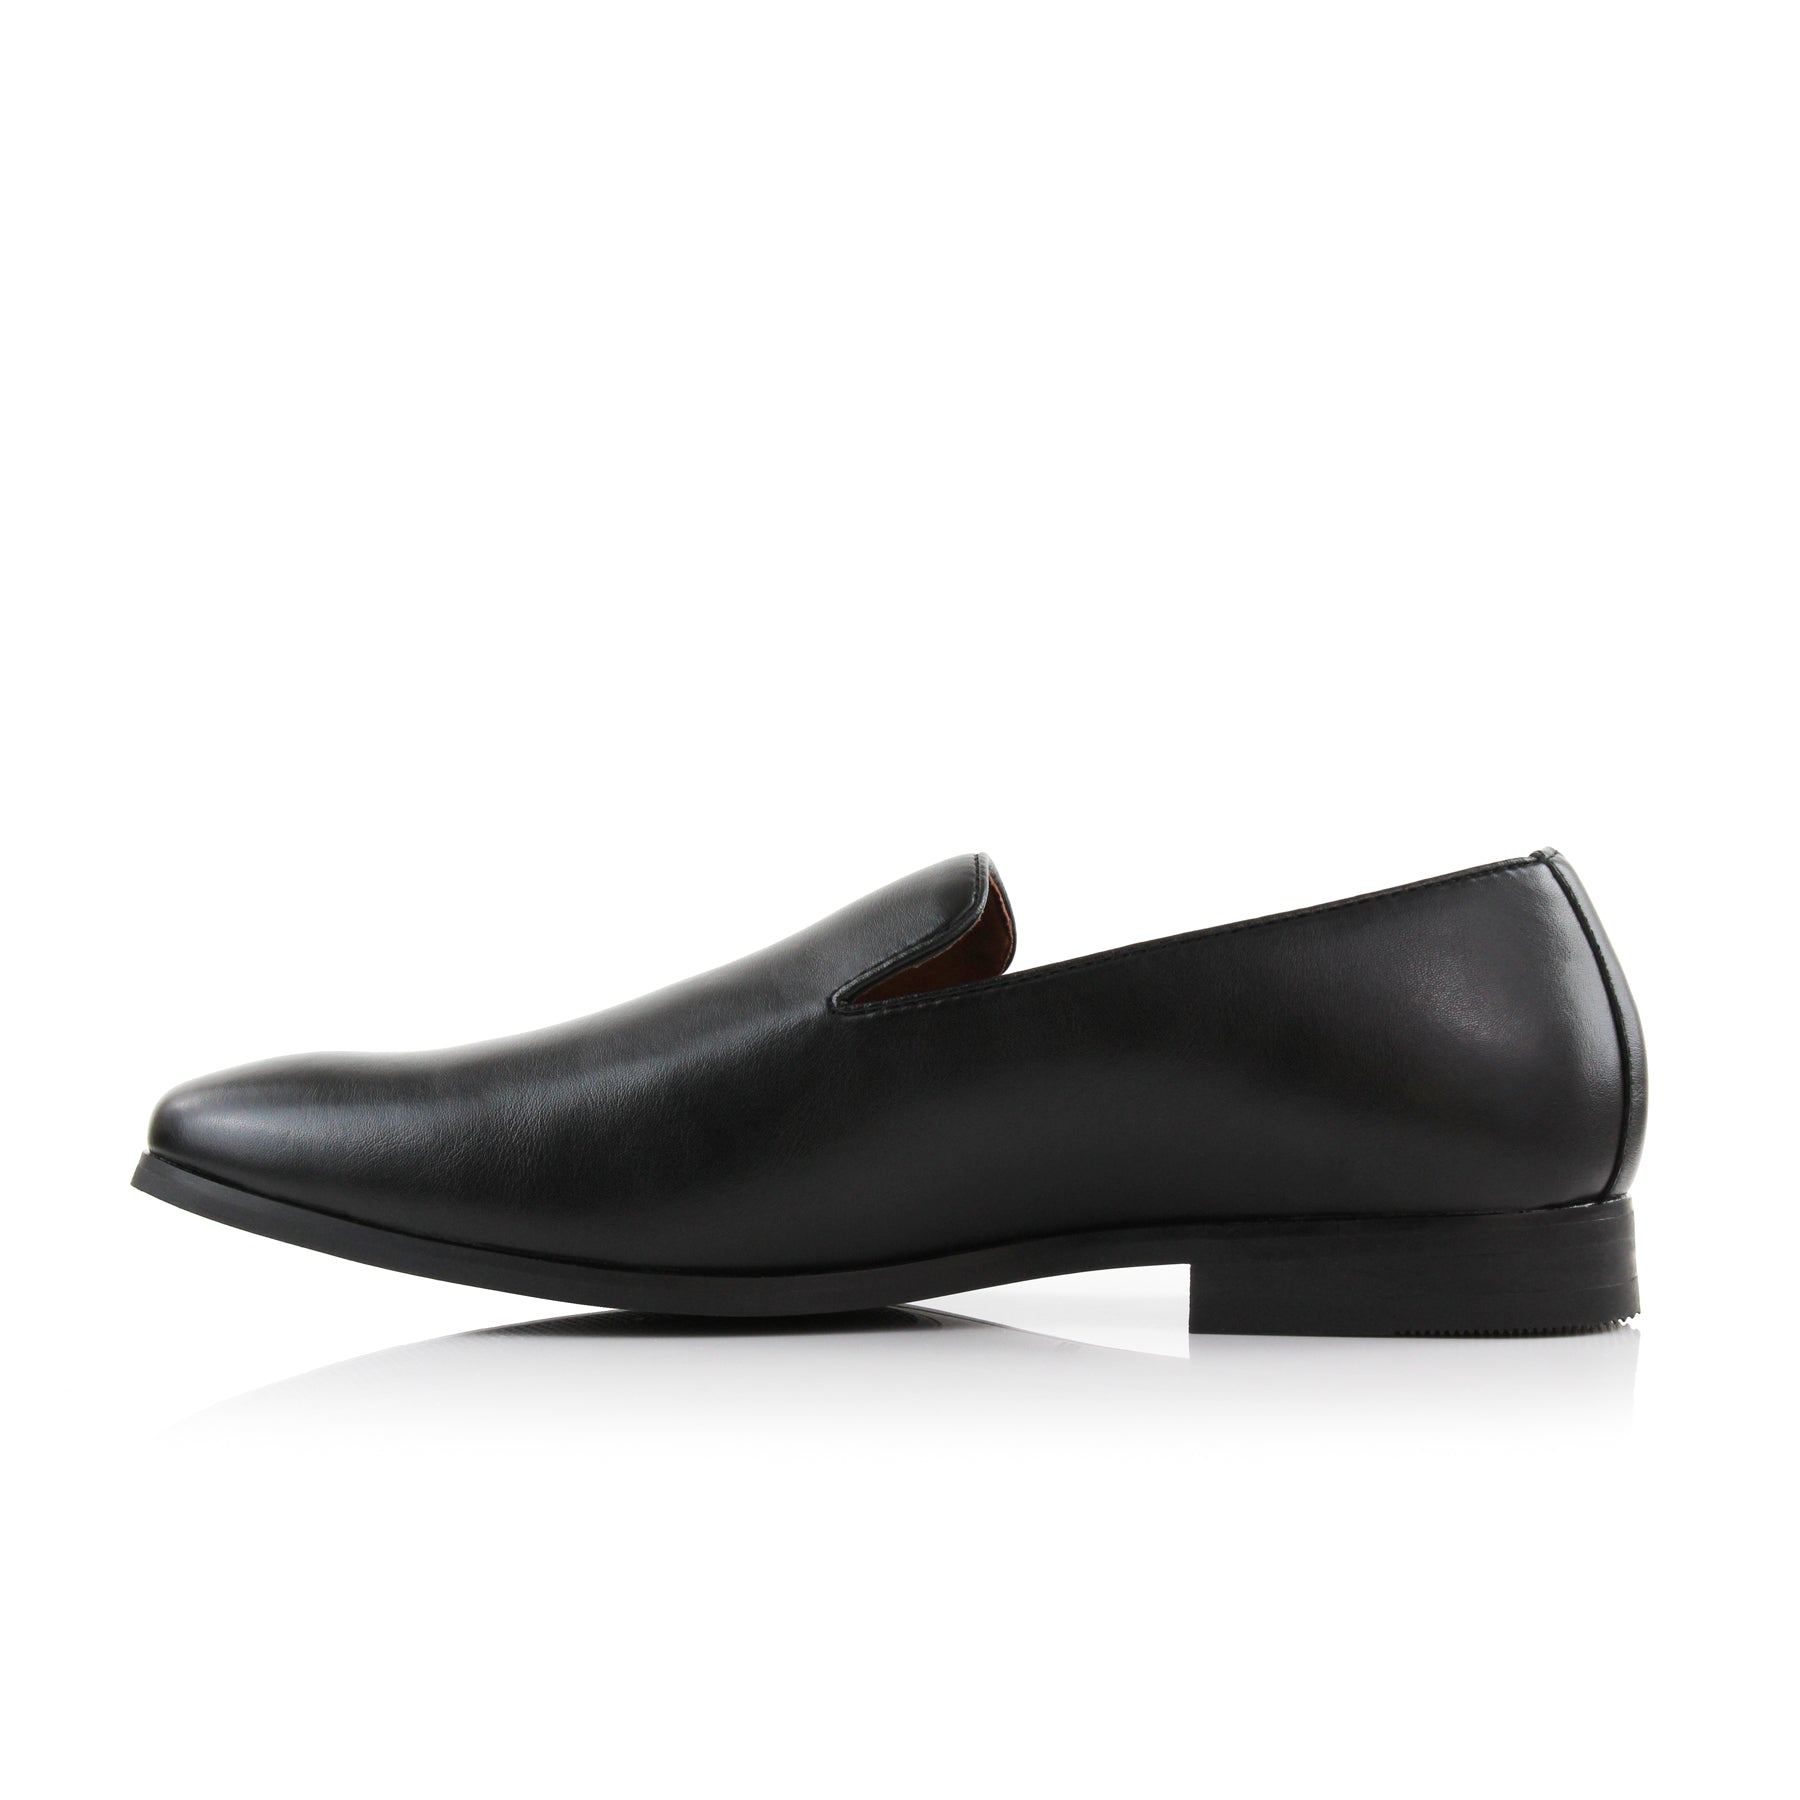 Wholecut Loafers | Clyde by Ferro Aldo | Conal Footwear | Inner Side Angle View